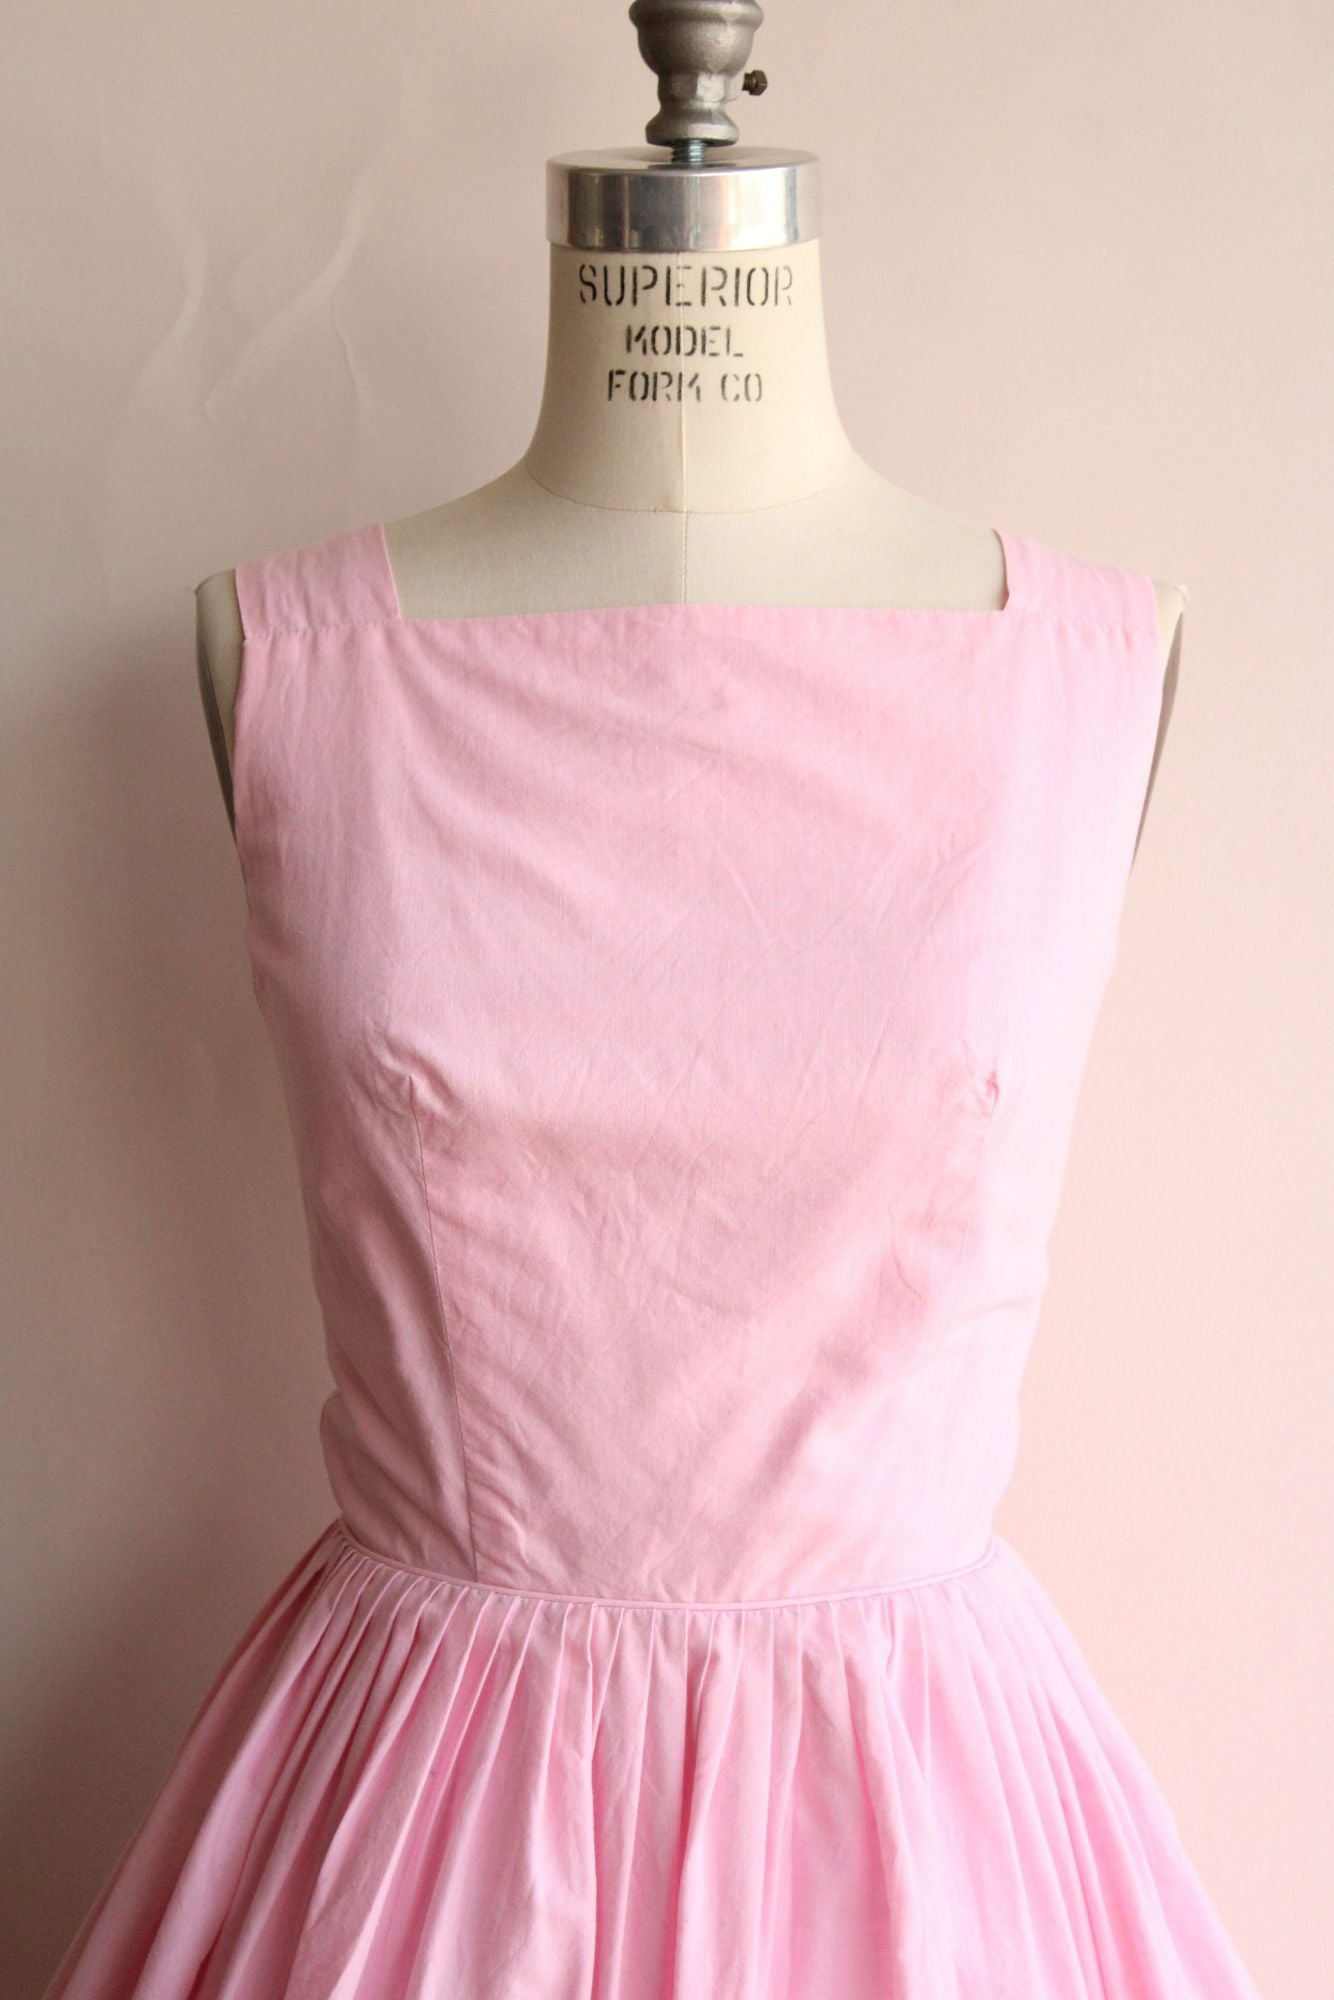 Vintage 1950s Martin Berens Tall Fashions Pink Cotton Sundress